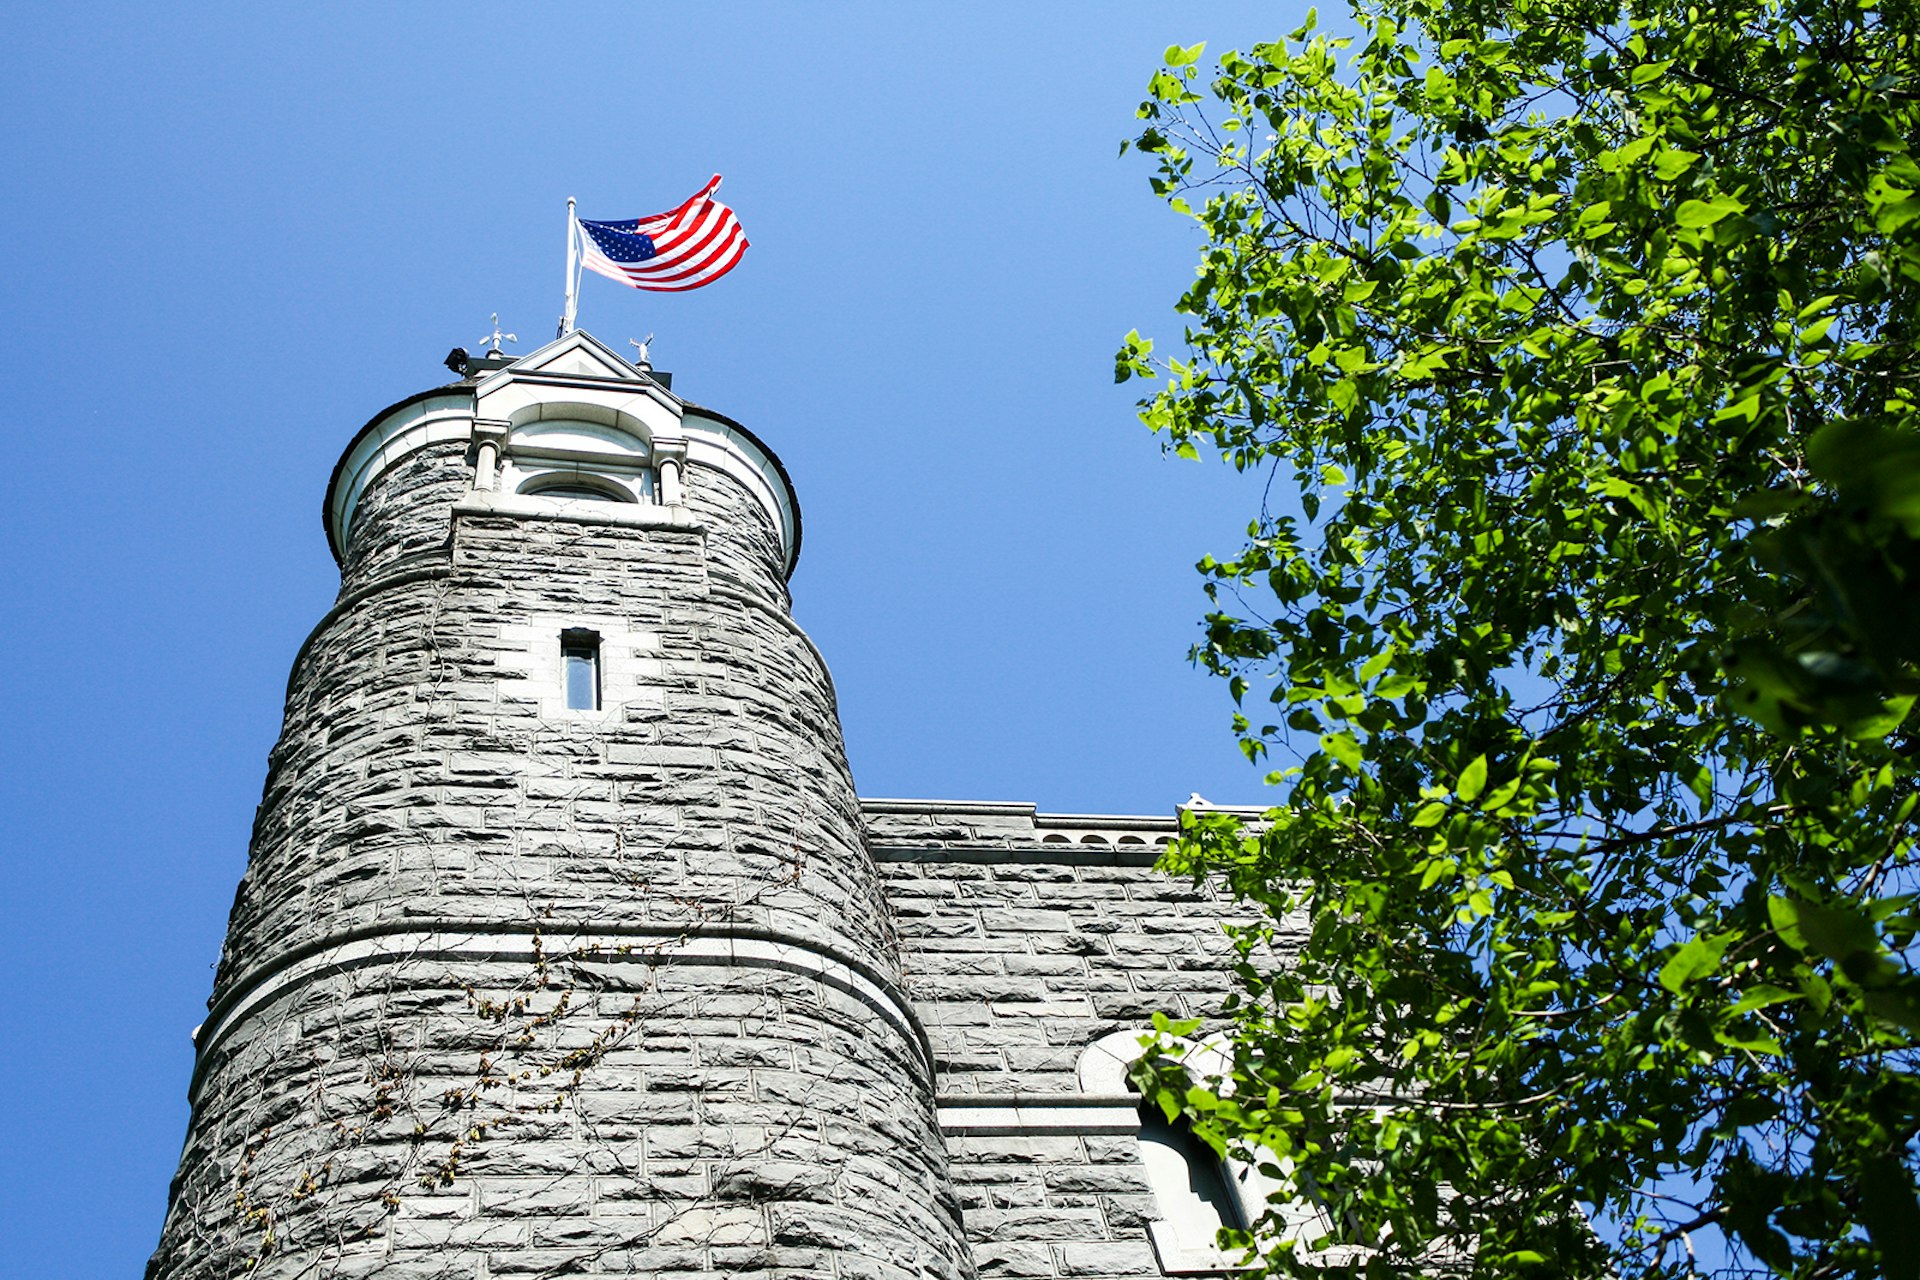 A gray stone tower topped by an American flag extends into the blue sky, framed by a green, leafy tree, in Central Park © Brian Bumby / Getty Images